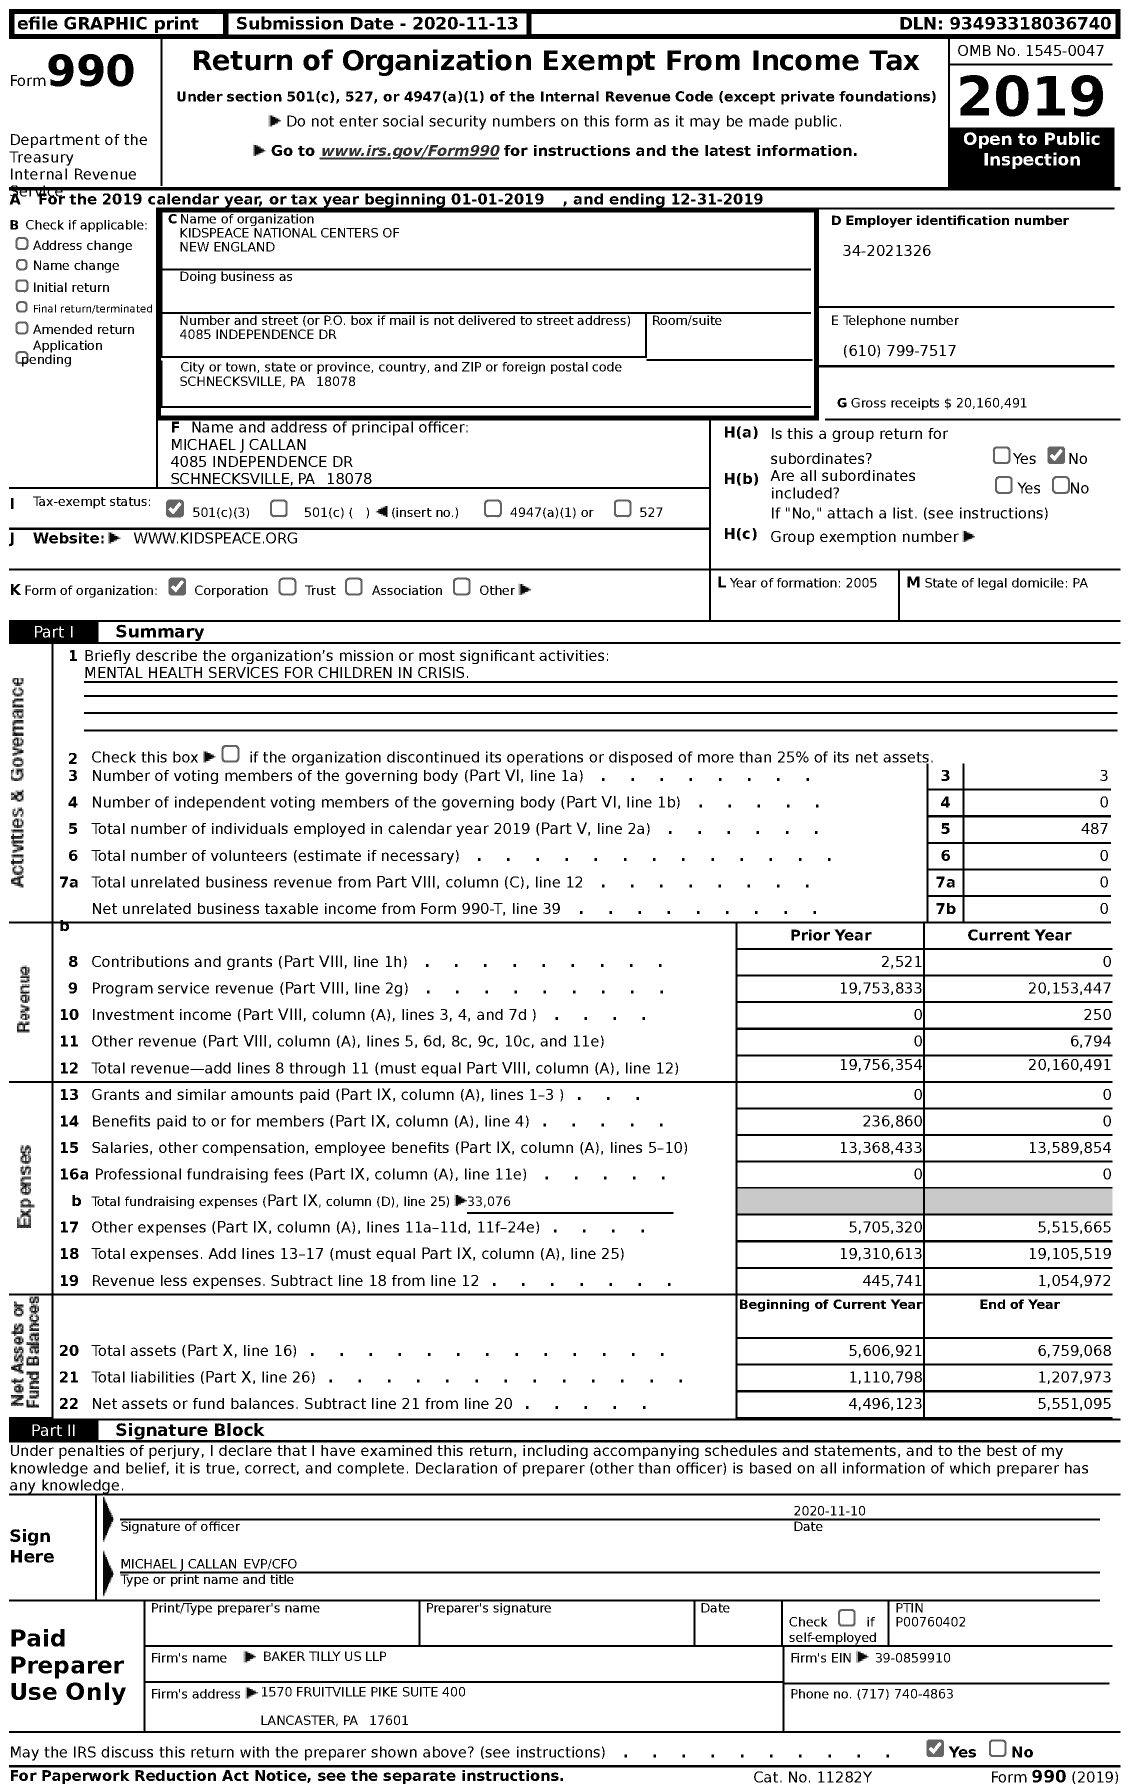 Image of first page of 2019 Form 990 for KidsPeace National Centers of New England